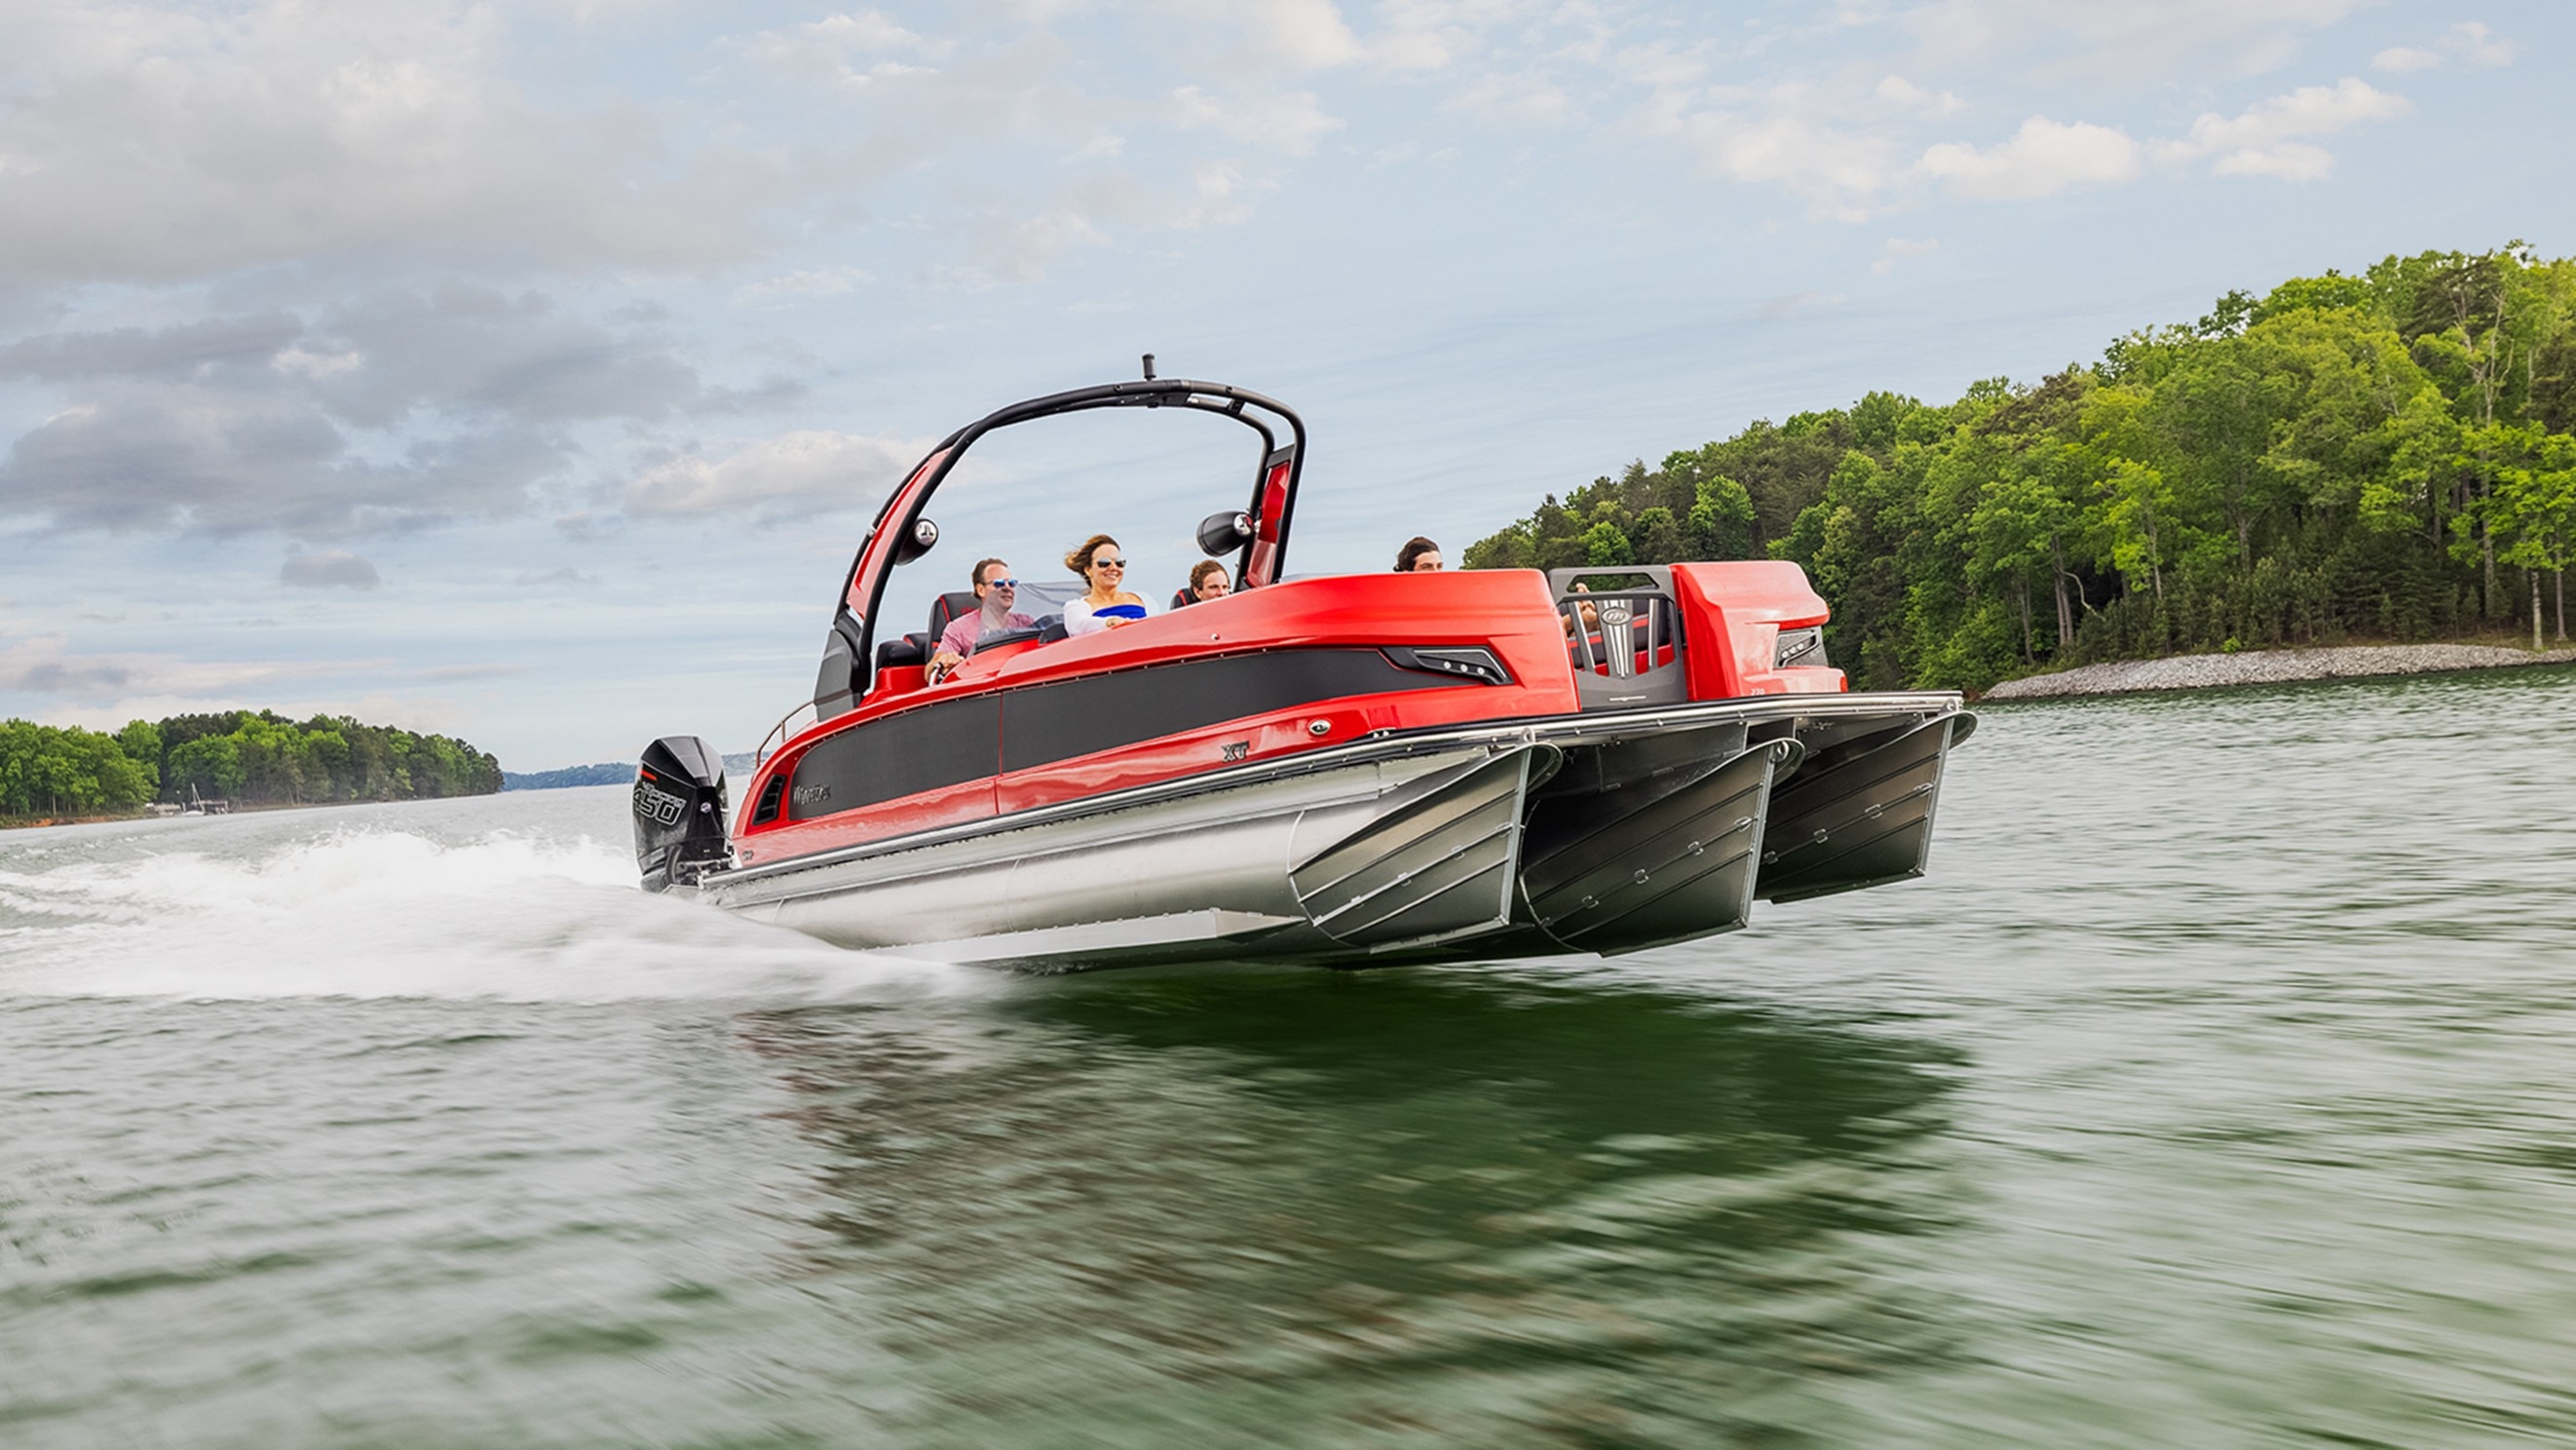 Luxury Manitou Pontoon Boar riding fast on the water